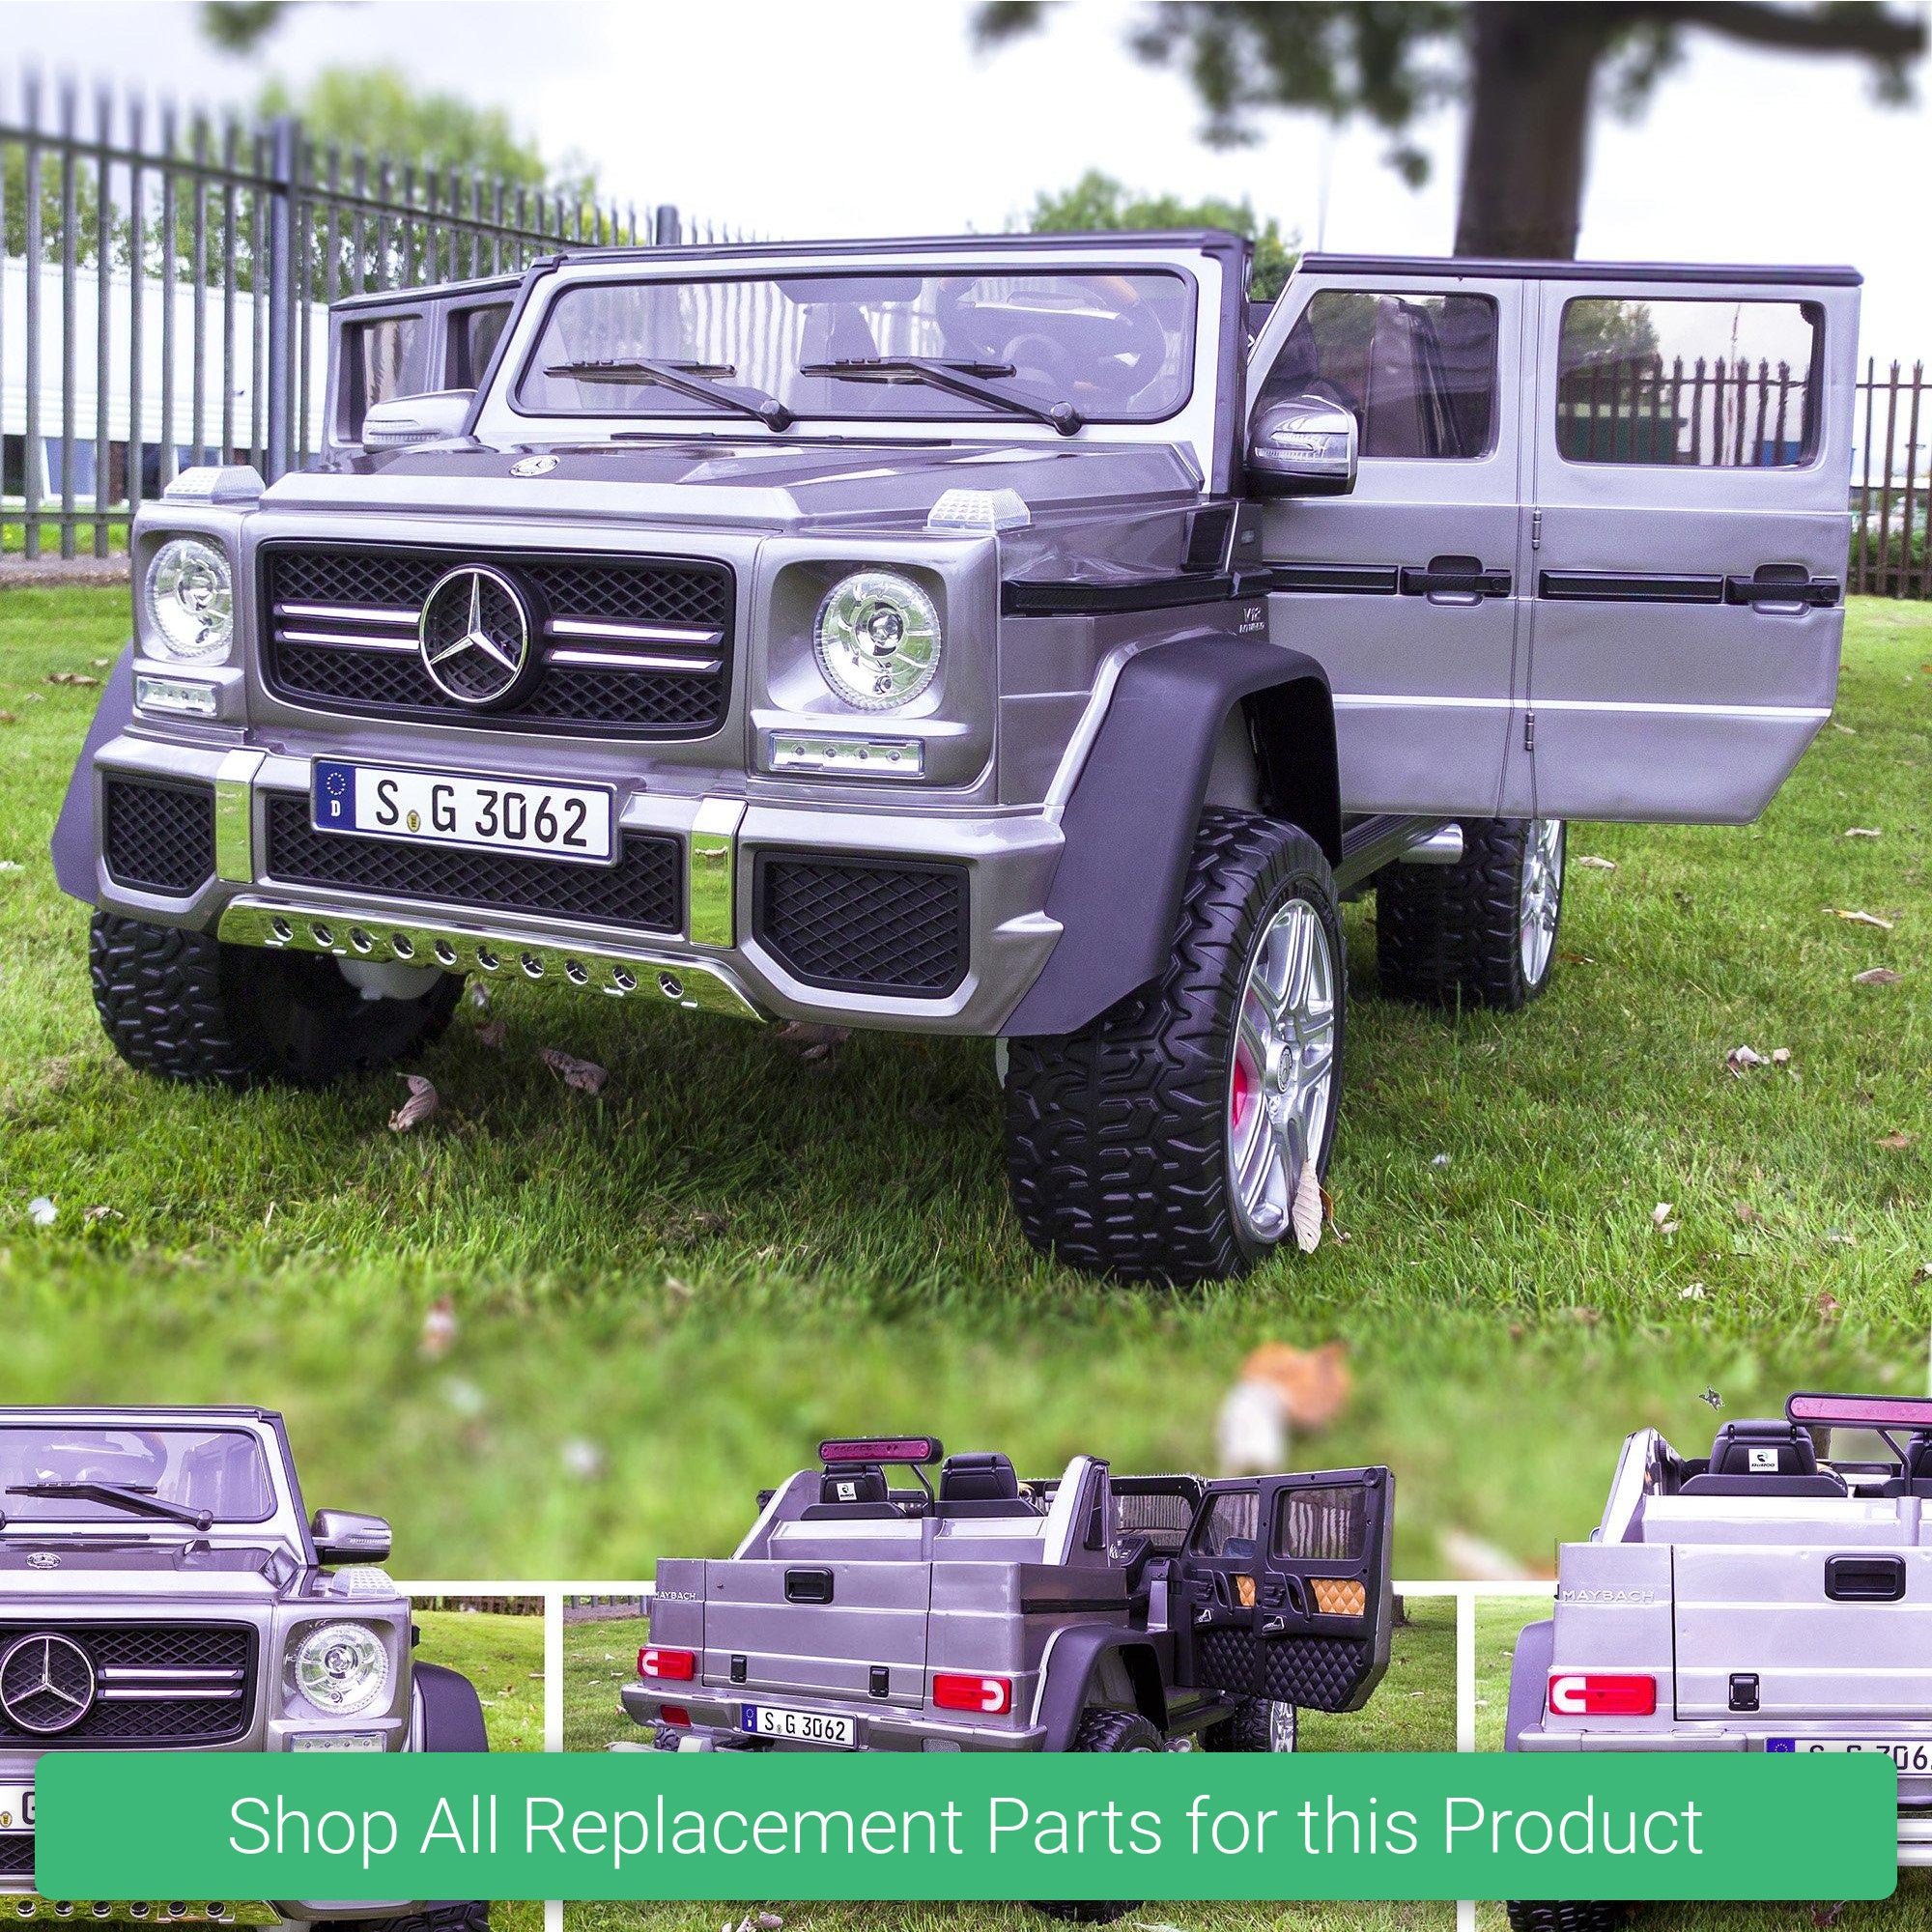 Replacement Parts and Spares for Kids Mercedes G650 AMG - G350-MER-2019 - G650